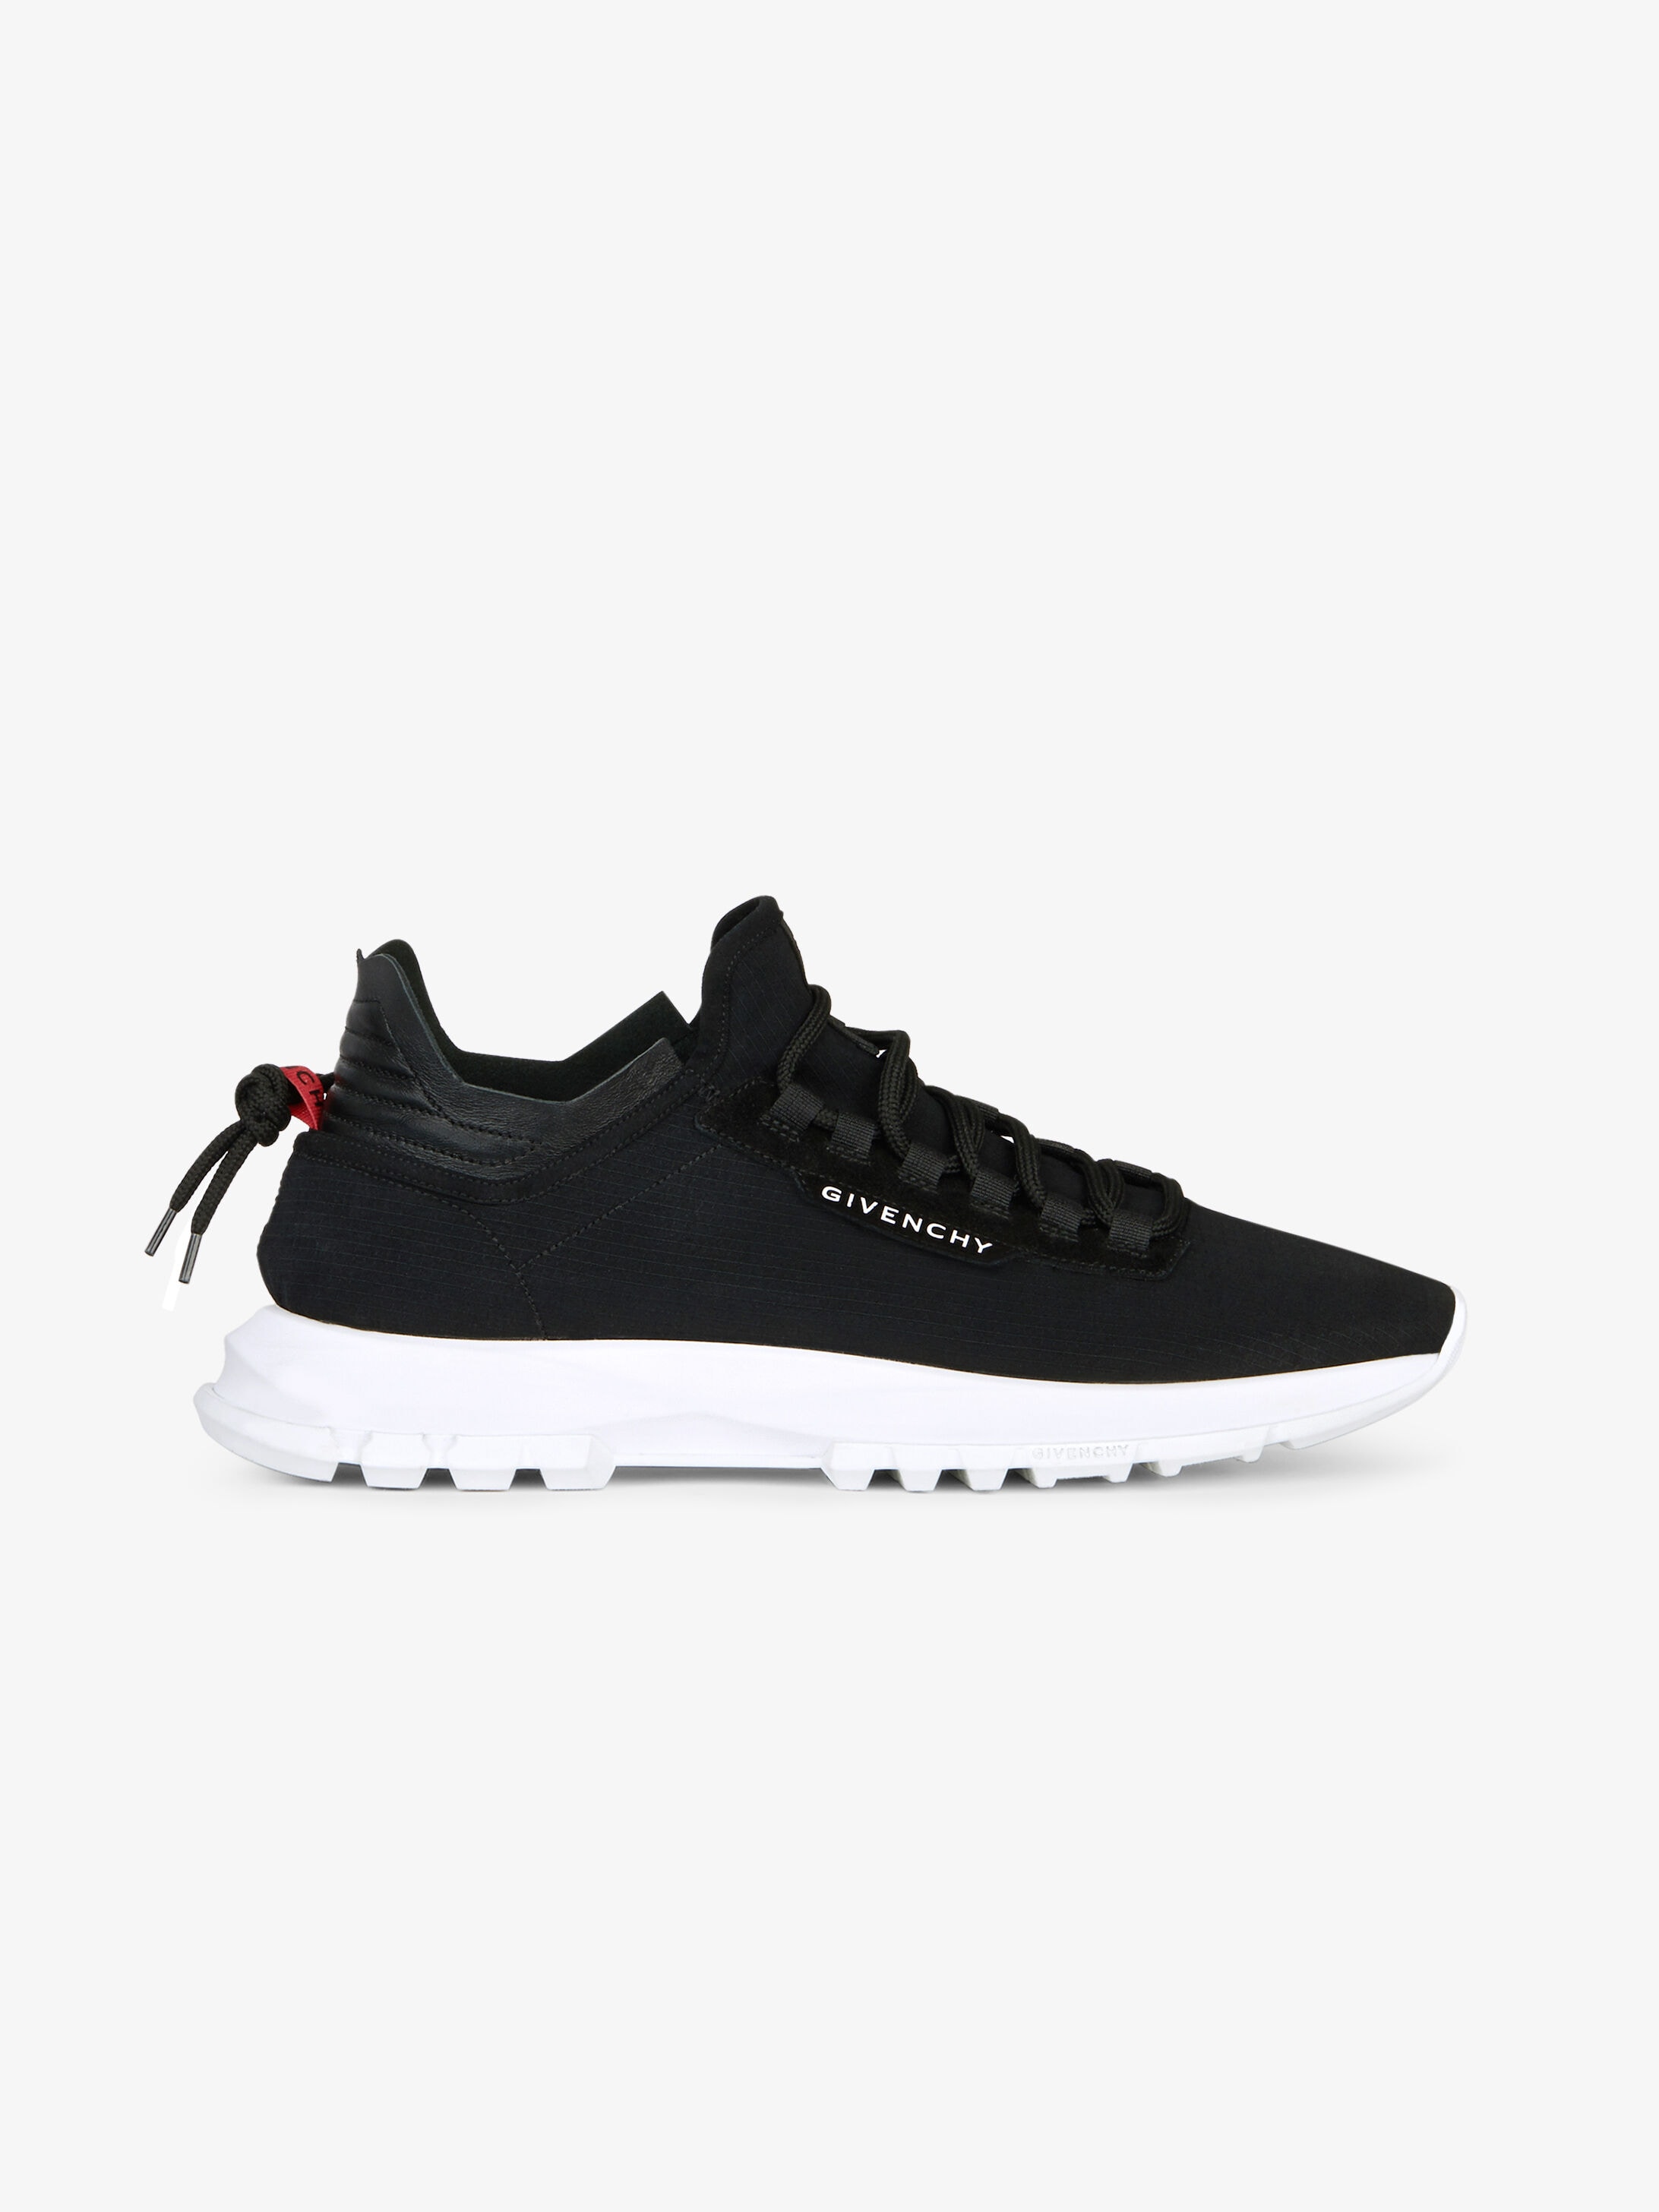 givenchy running shoes